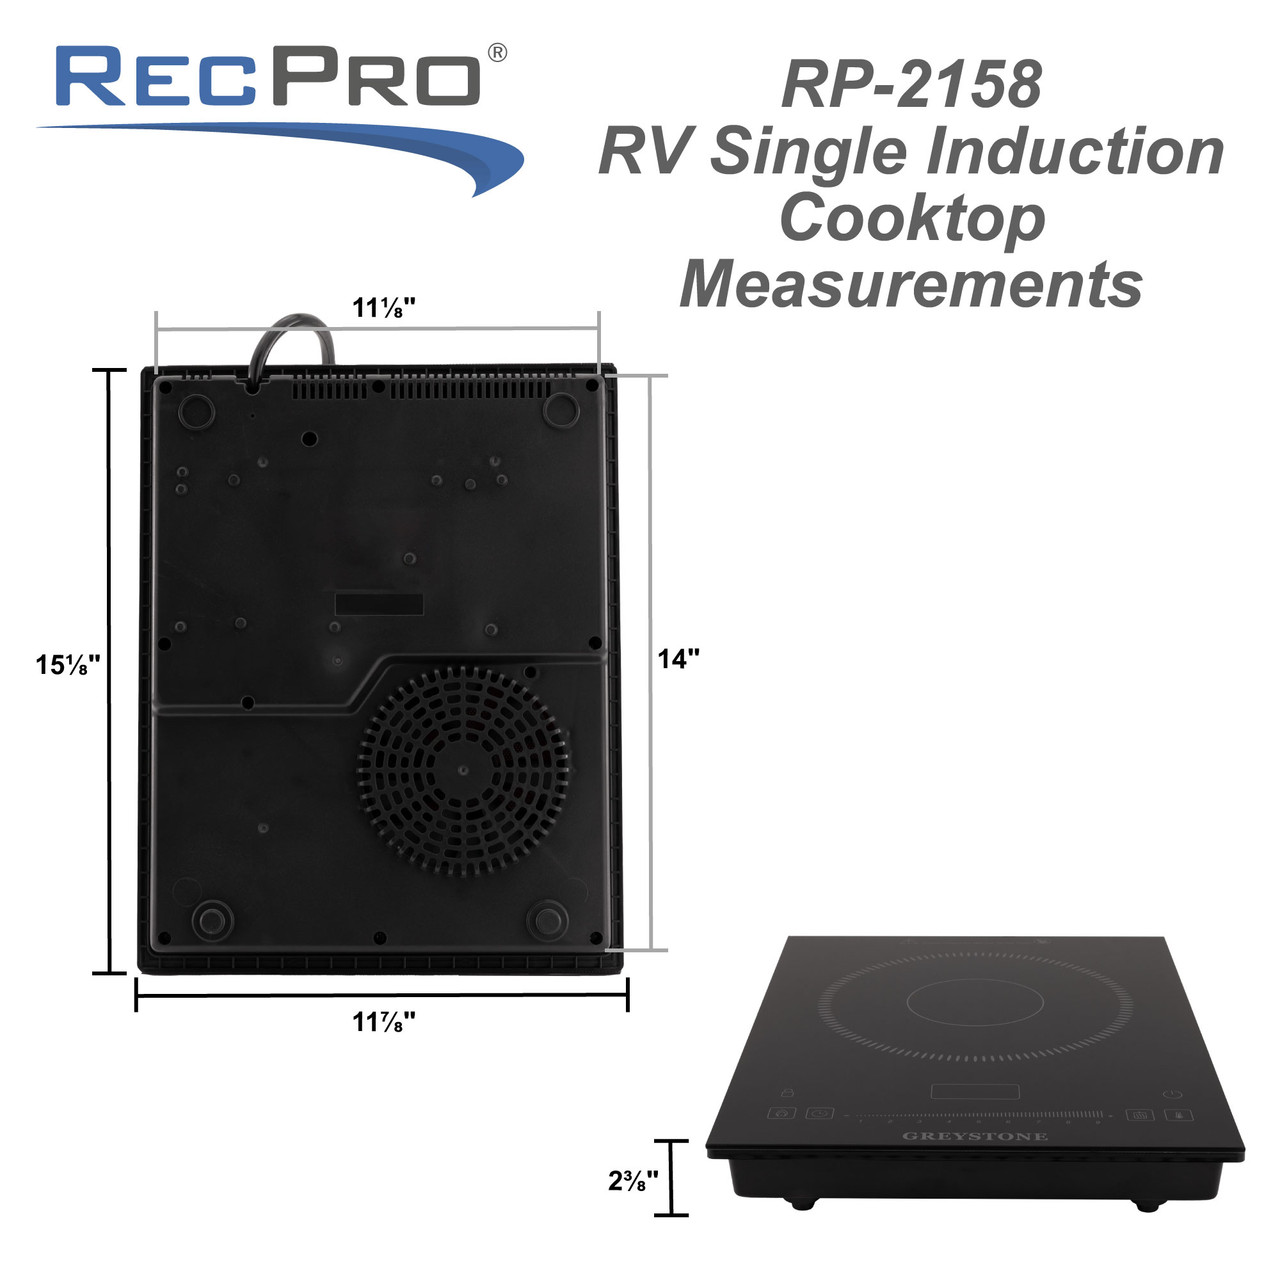 https://cdn11.bigcommerce.com/s-kwuh809851/images/stencil/1280x1280/products/1231/22608/RP-2158-Single-Induction-Cooktop-Measurements__26907.1701875223.jpg?c=2&imbypass=on